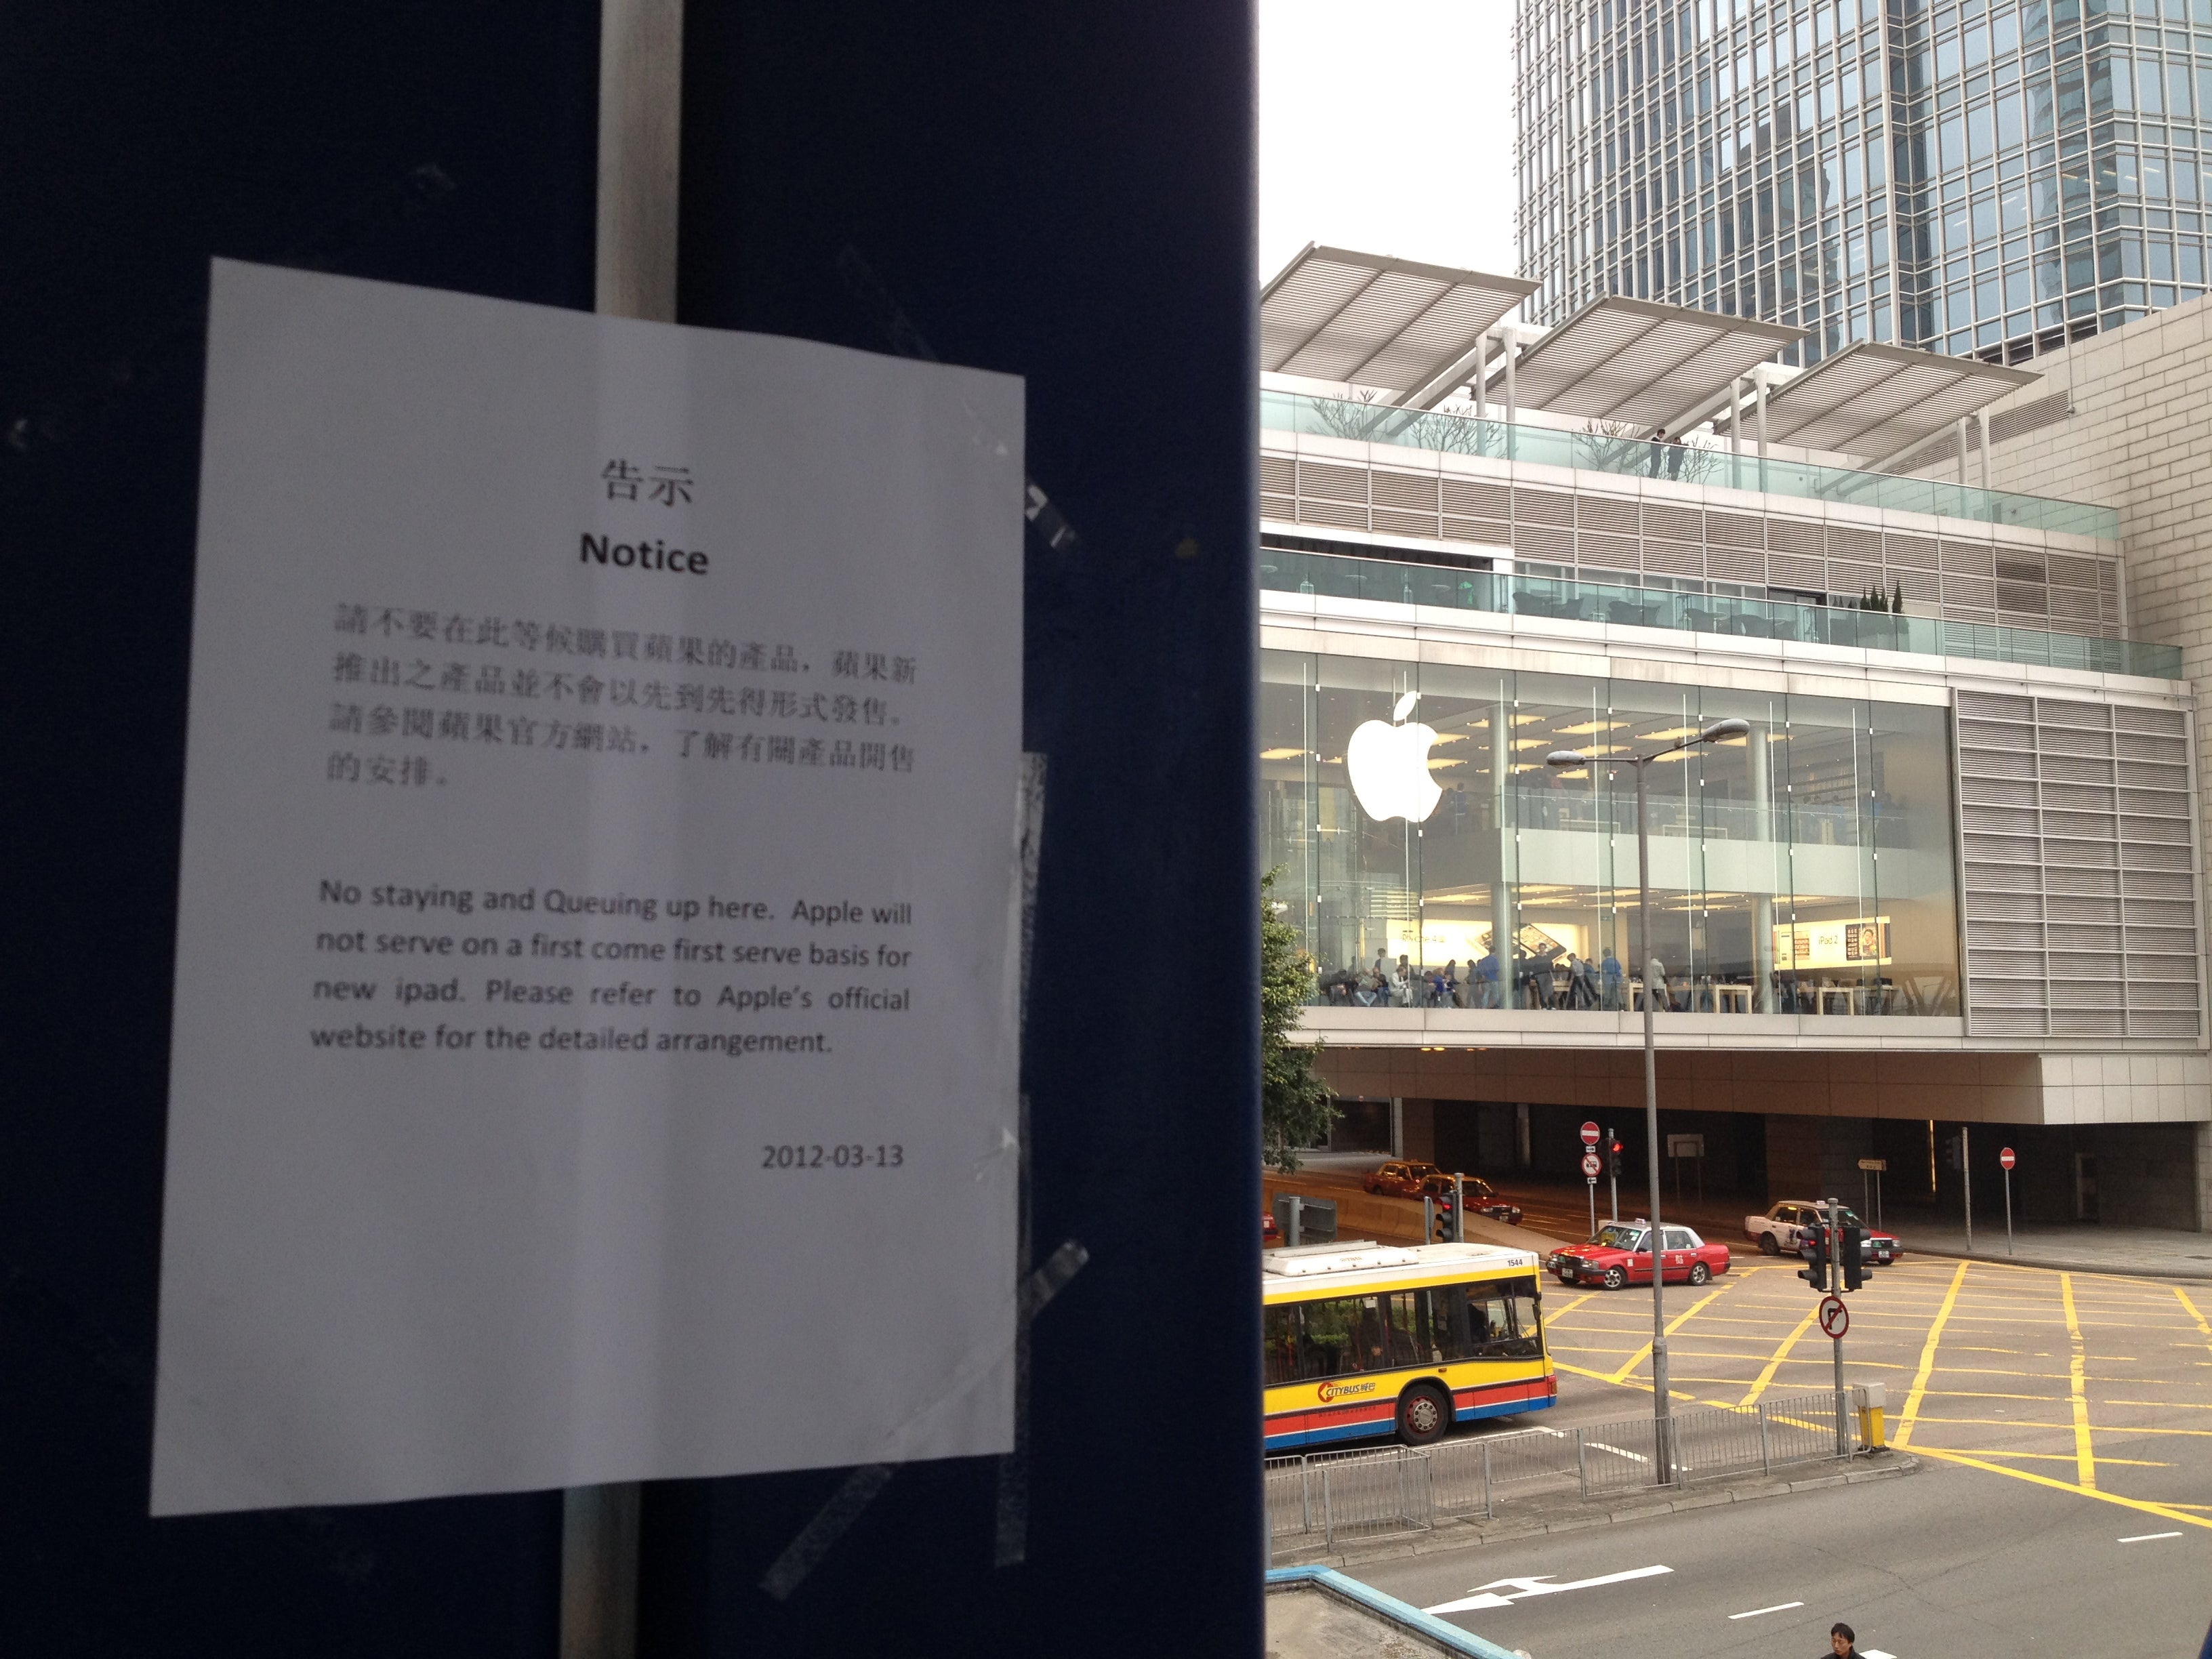 While posts say no lines are allowed at the Hong Kong Apple Store (L), the crowd has moved to a footbridge hundreds of yards away (R) - Signs posted around Hong Kong Apple Store say new iPad won&#039;t be sold on first-come first-served basis